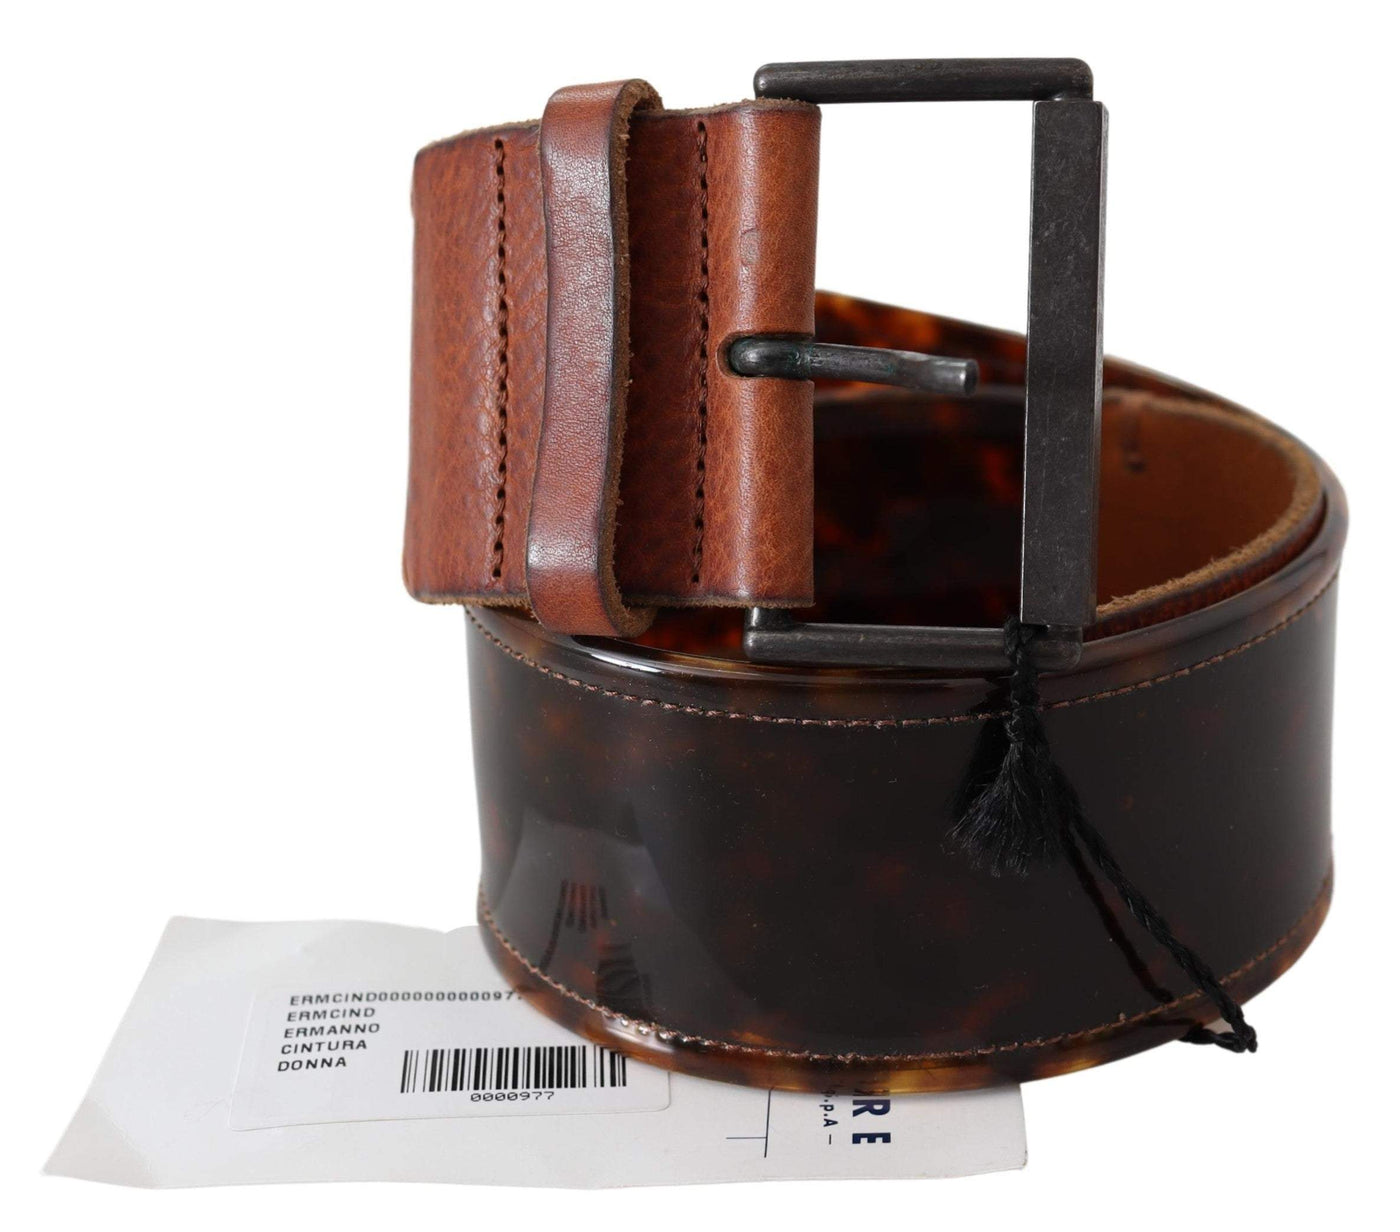 Ermanno Scervino Dark Brown Leather Wide Buckle Belt 75 cm / 30 Inches, Accessories - New Arrivals, Belts - Women - Accessories, Brown, Ermanno Scervino, feed-agegroup-adult, feed-color-Brown, feed-gender-female at SEYMAYKA